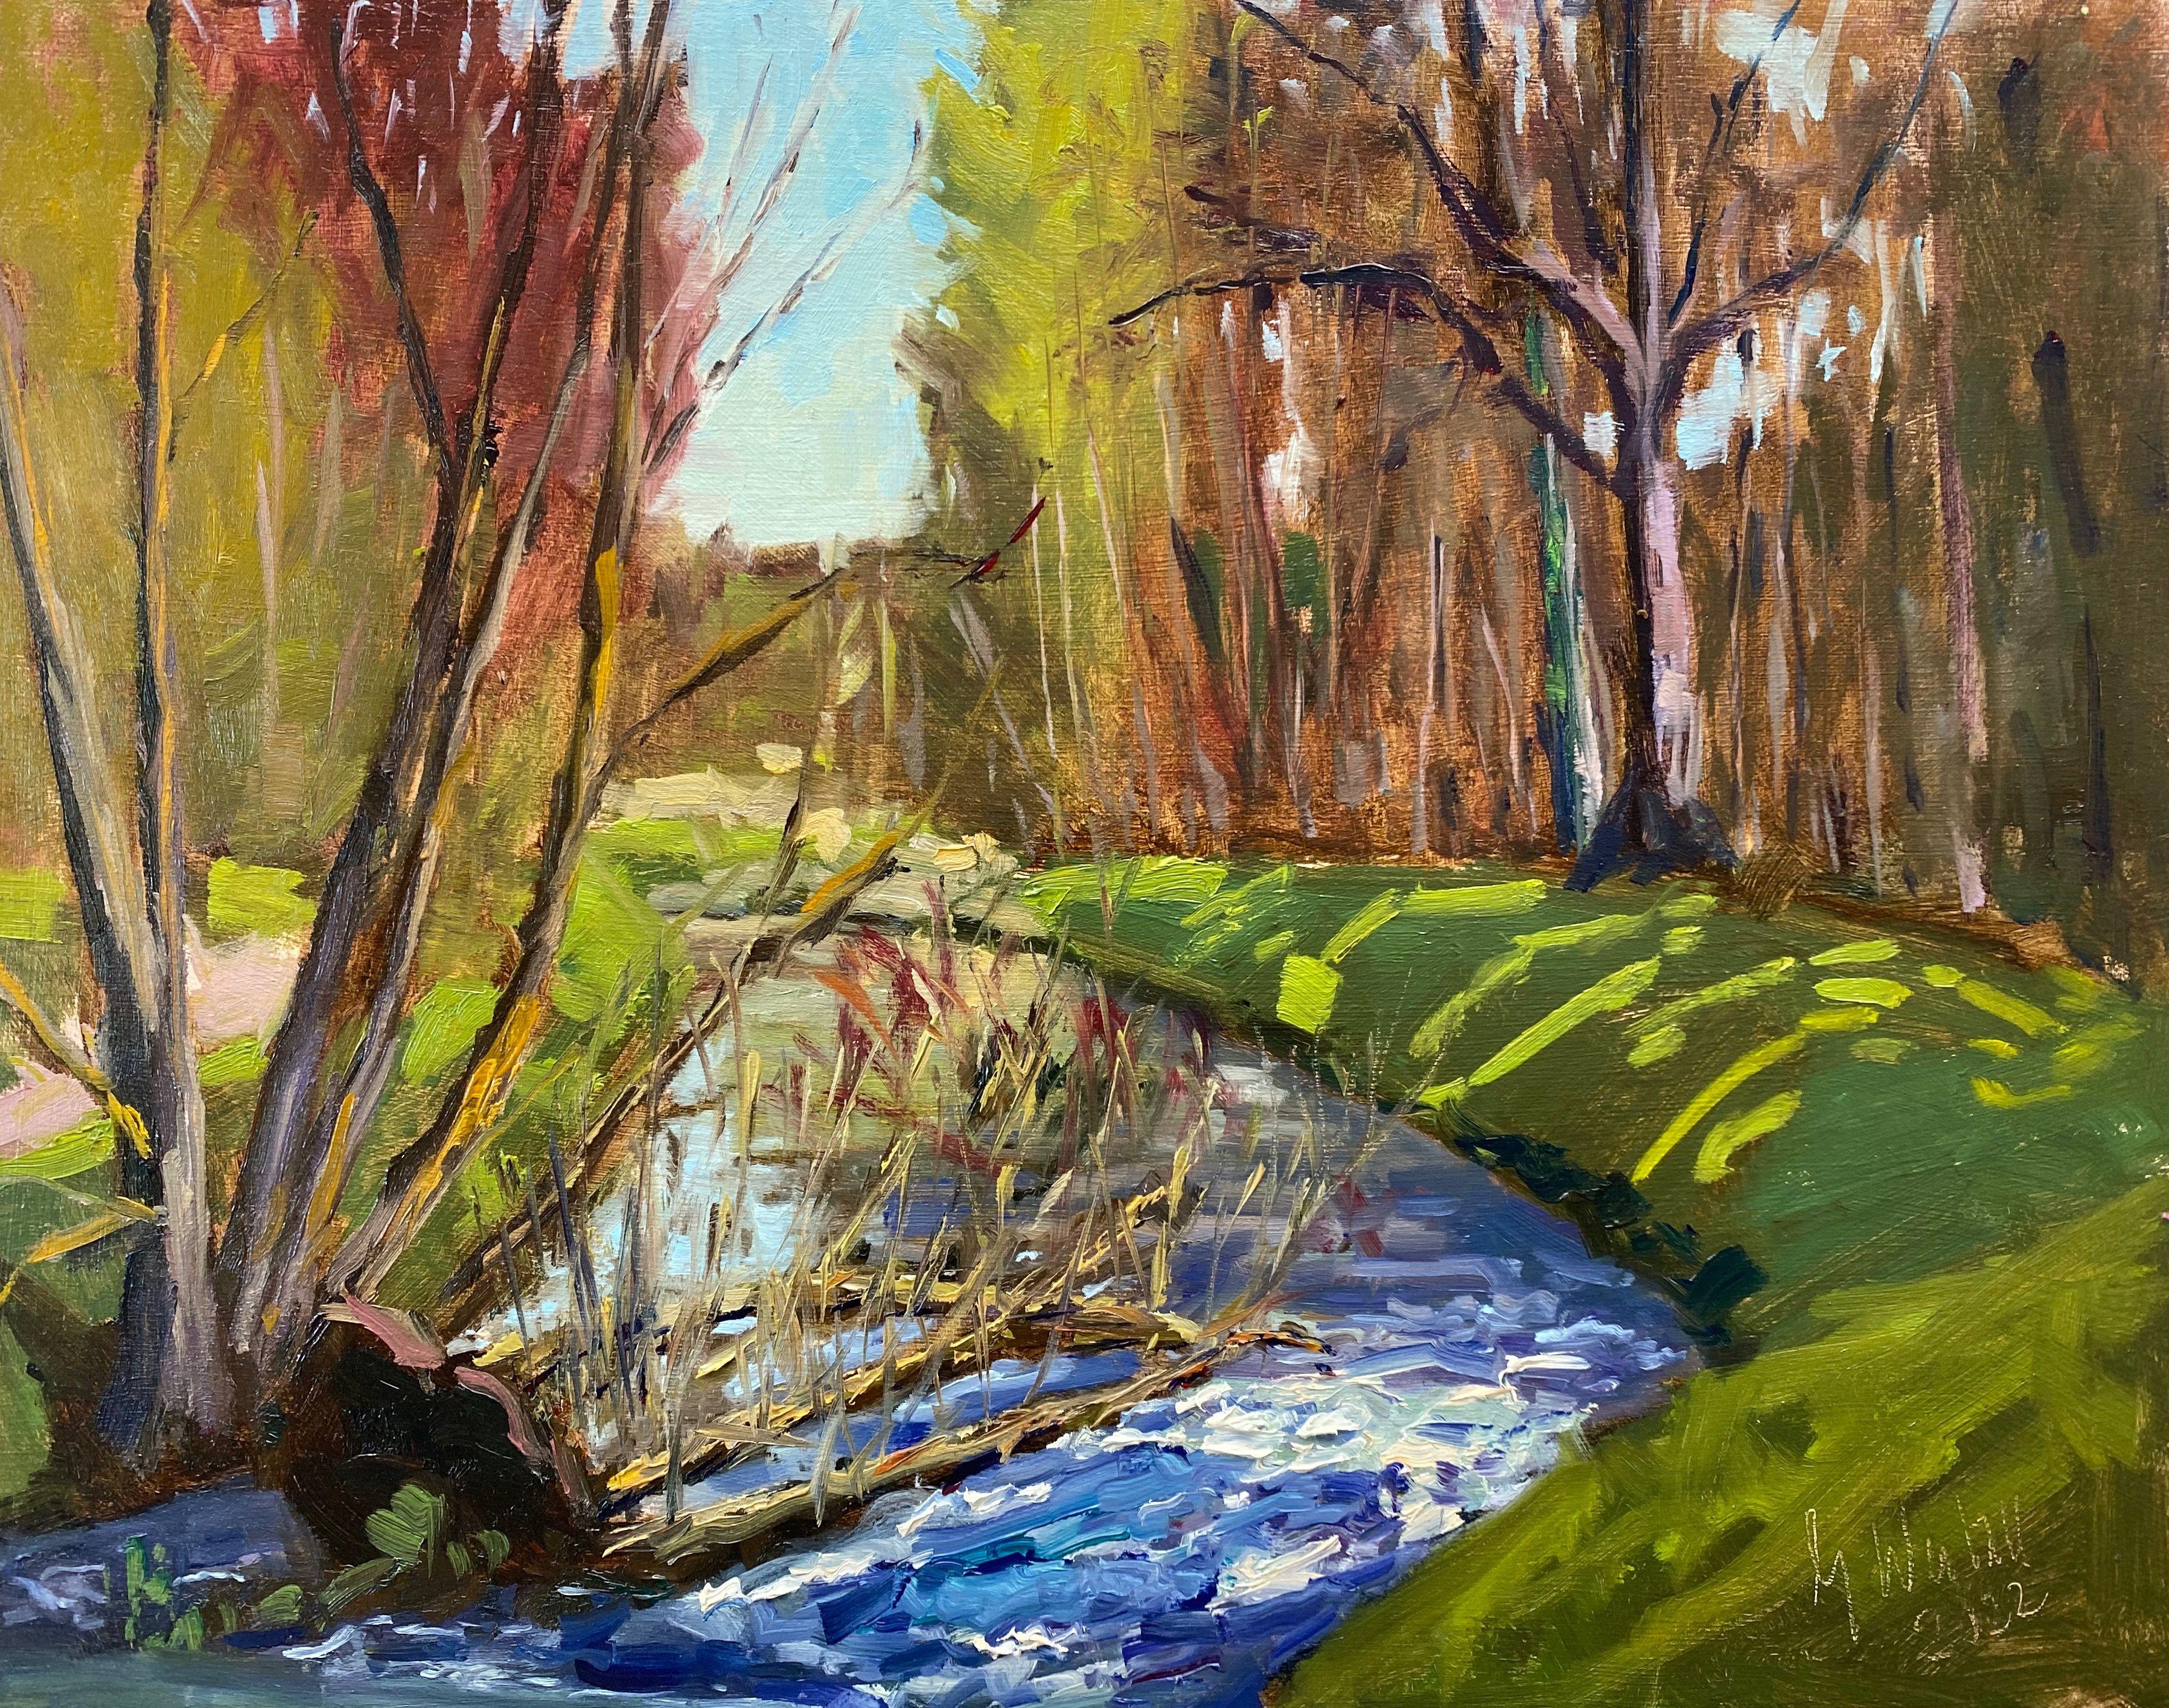 A plein air painting on the River Big Aue, Espelkamp, Germany. I love this place it always presents new subjects to paint. The little waterfall attracted my attention and I could sense, smell and see the feeling of spring. :: Painting ::